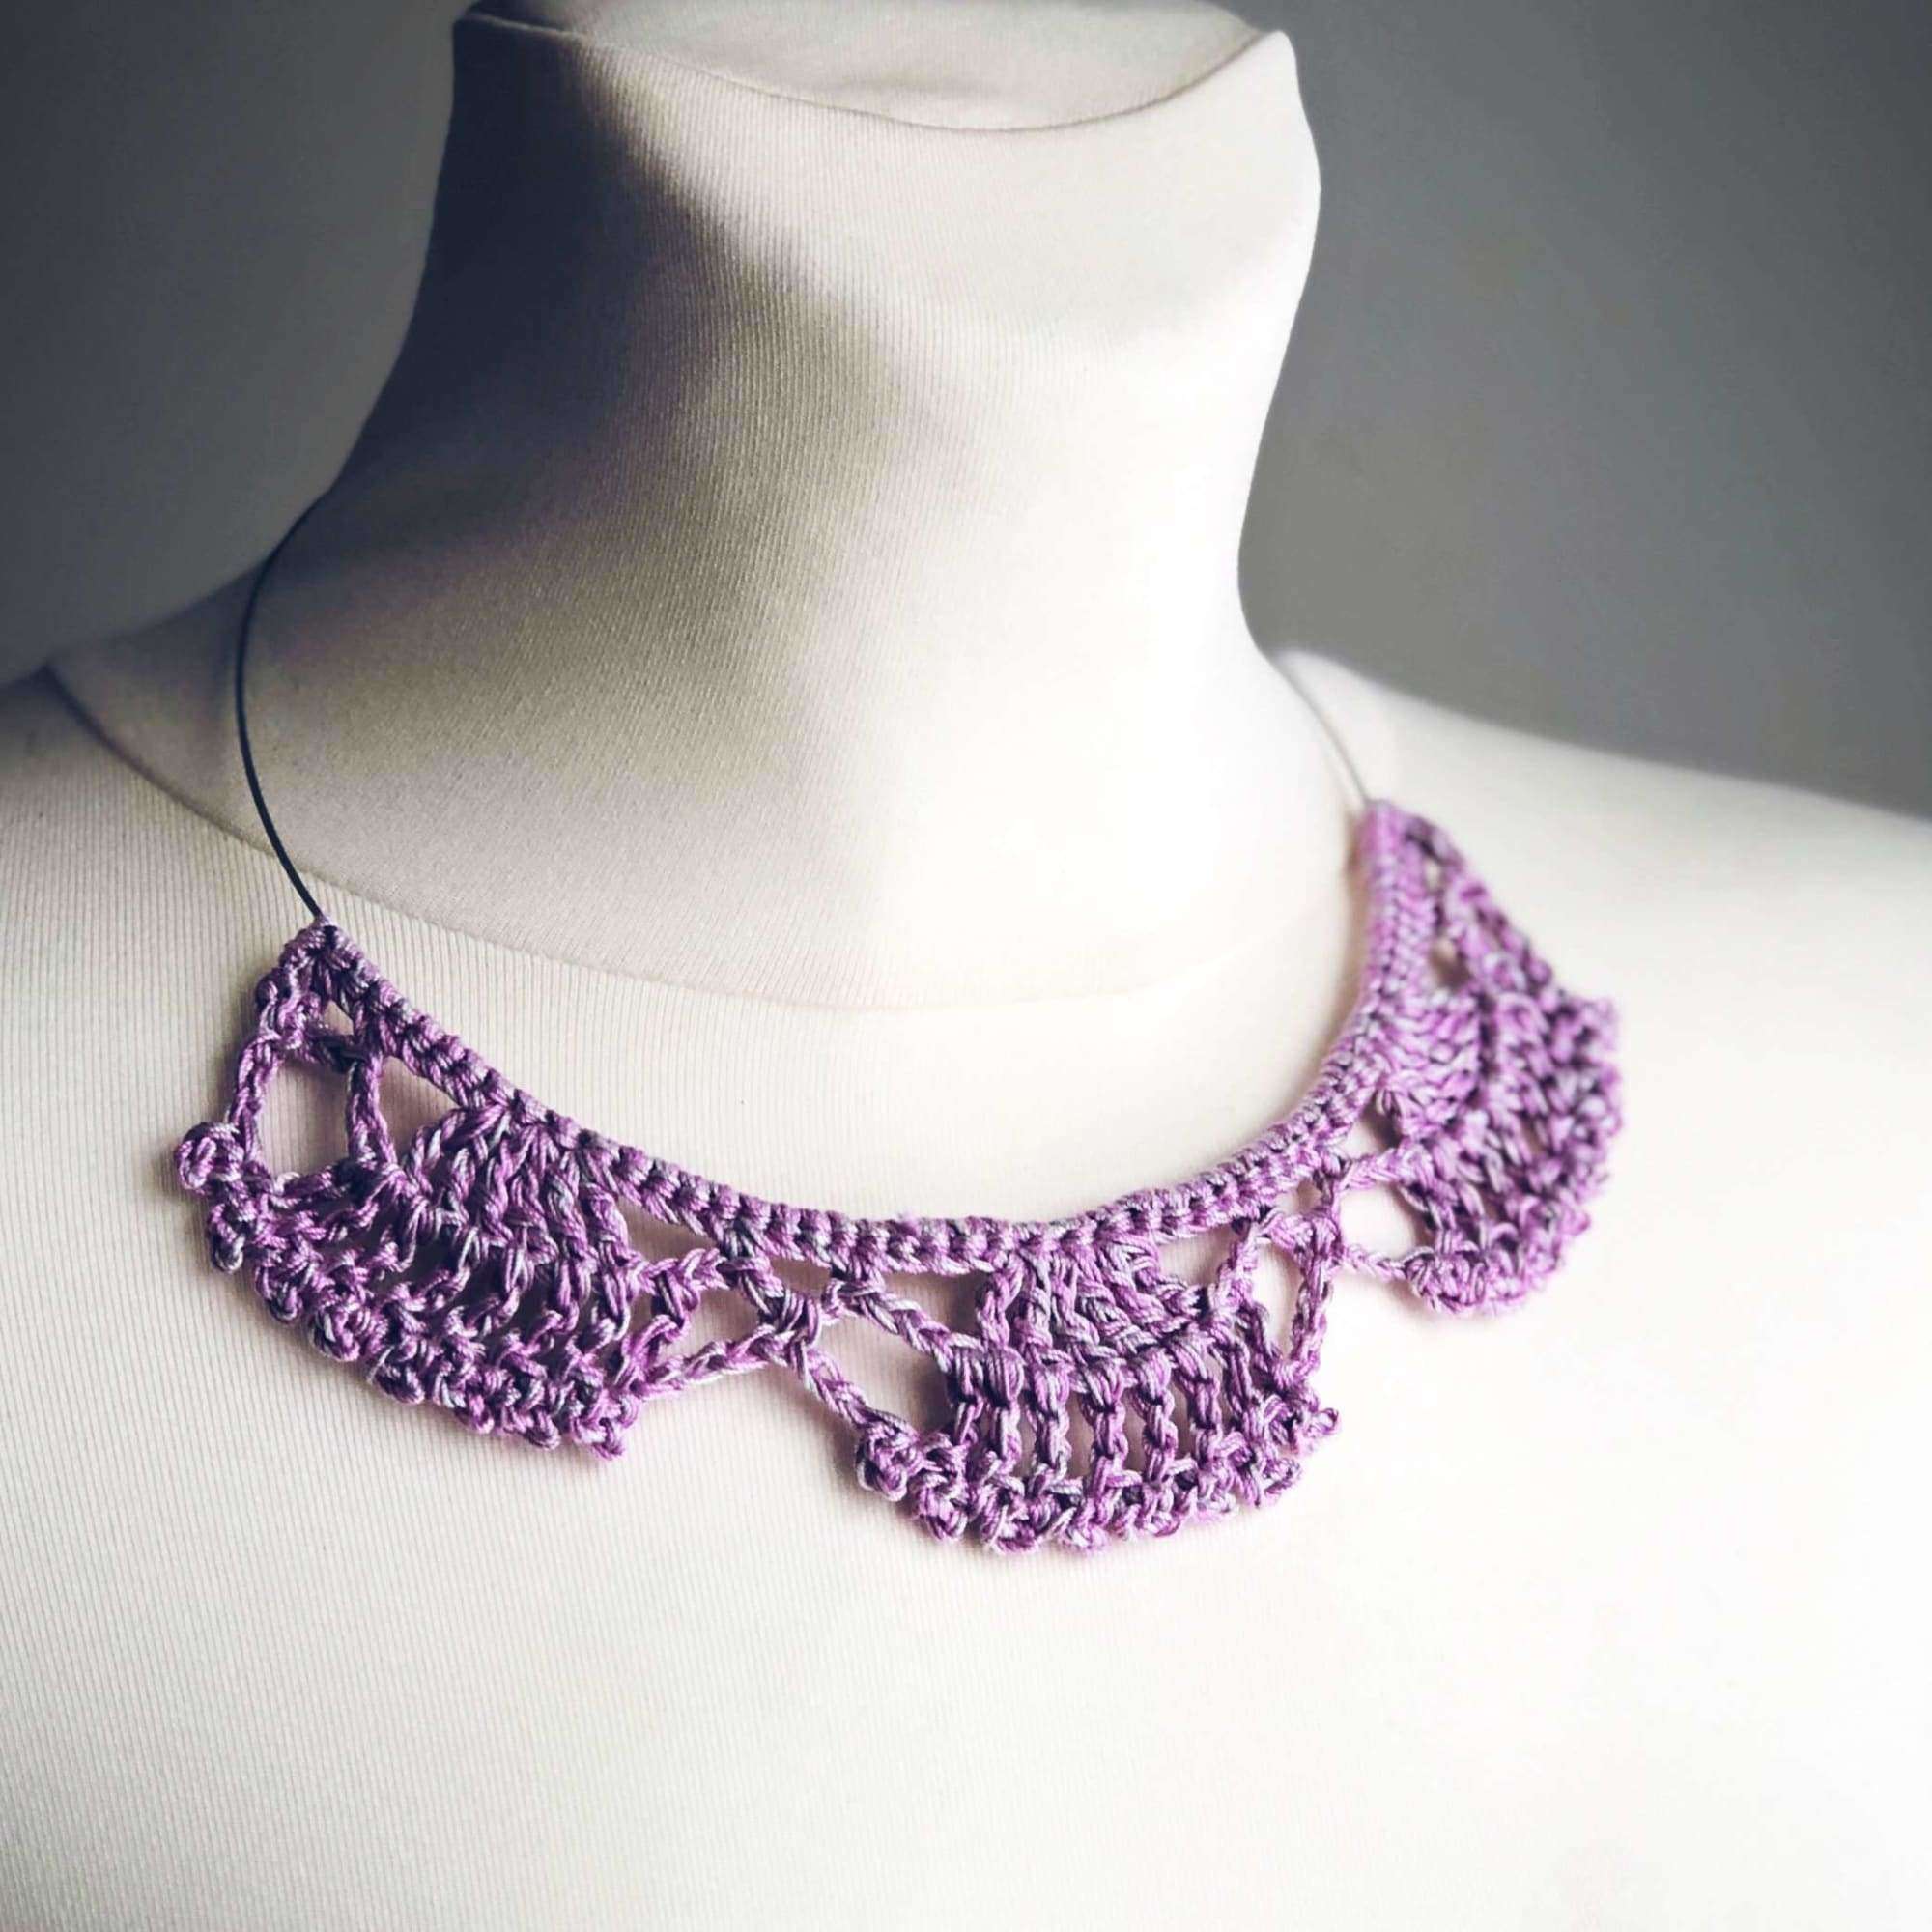 Beautiful Crochet Floral Necklace – A Free Pattern For You! – LoopKnitlounge